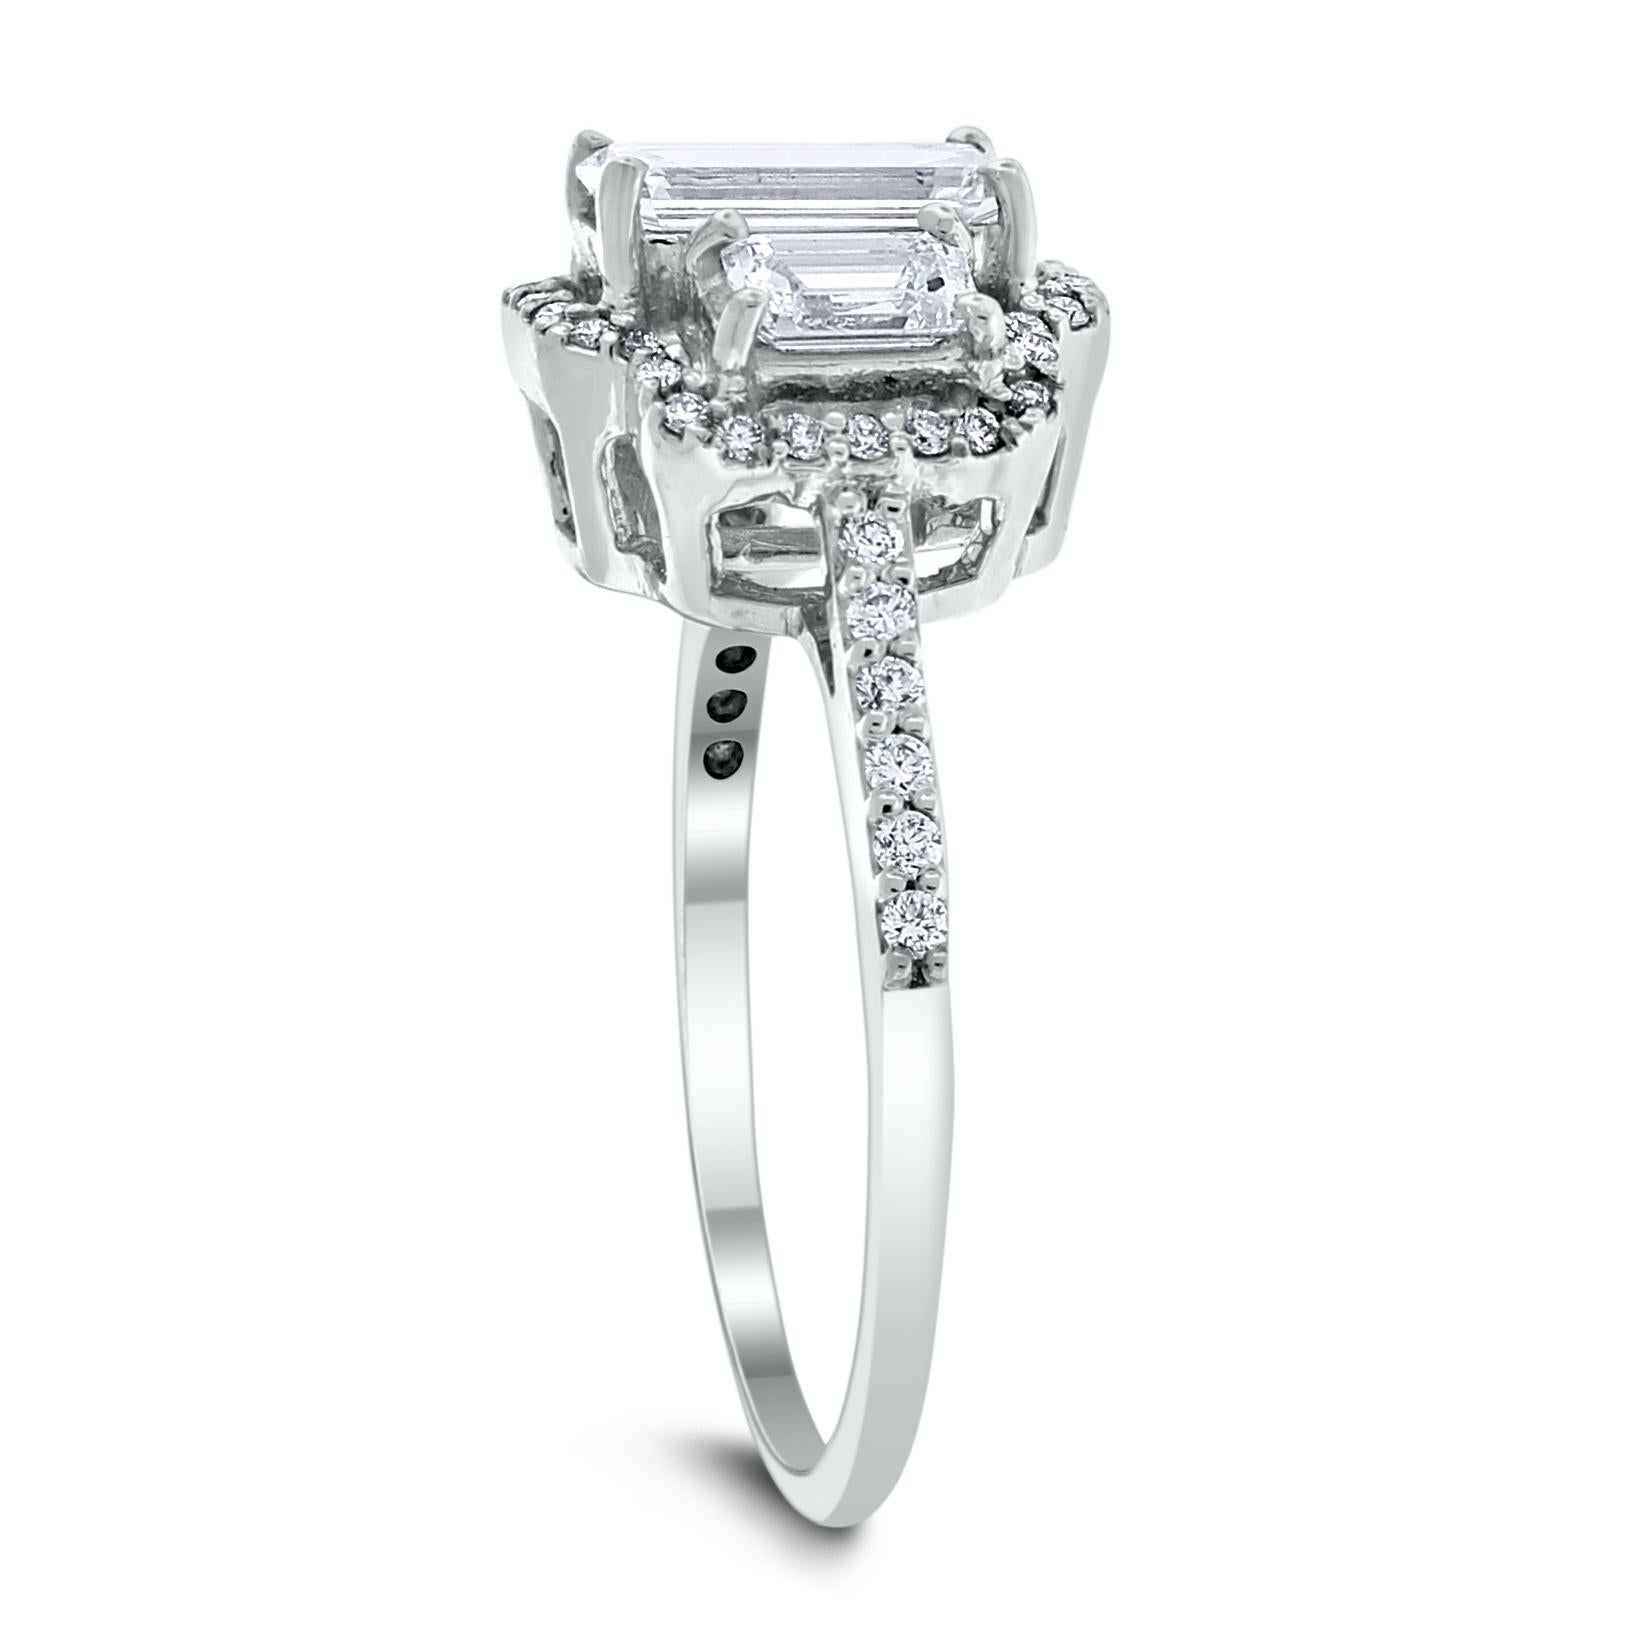 The Diana Ring is a classy statement Emerald Cut solitaire ring which can be fashioned as an engagement ring as well as a fashion ring.

Center Diamond Shape: Emerald Cut
Center Diamond Weight: 0.82 ct 
Diamond Color: I
Diamond Clarity: VVS

Side